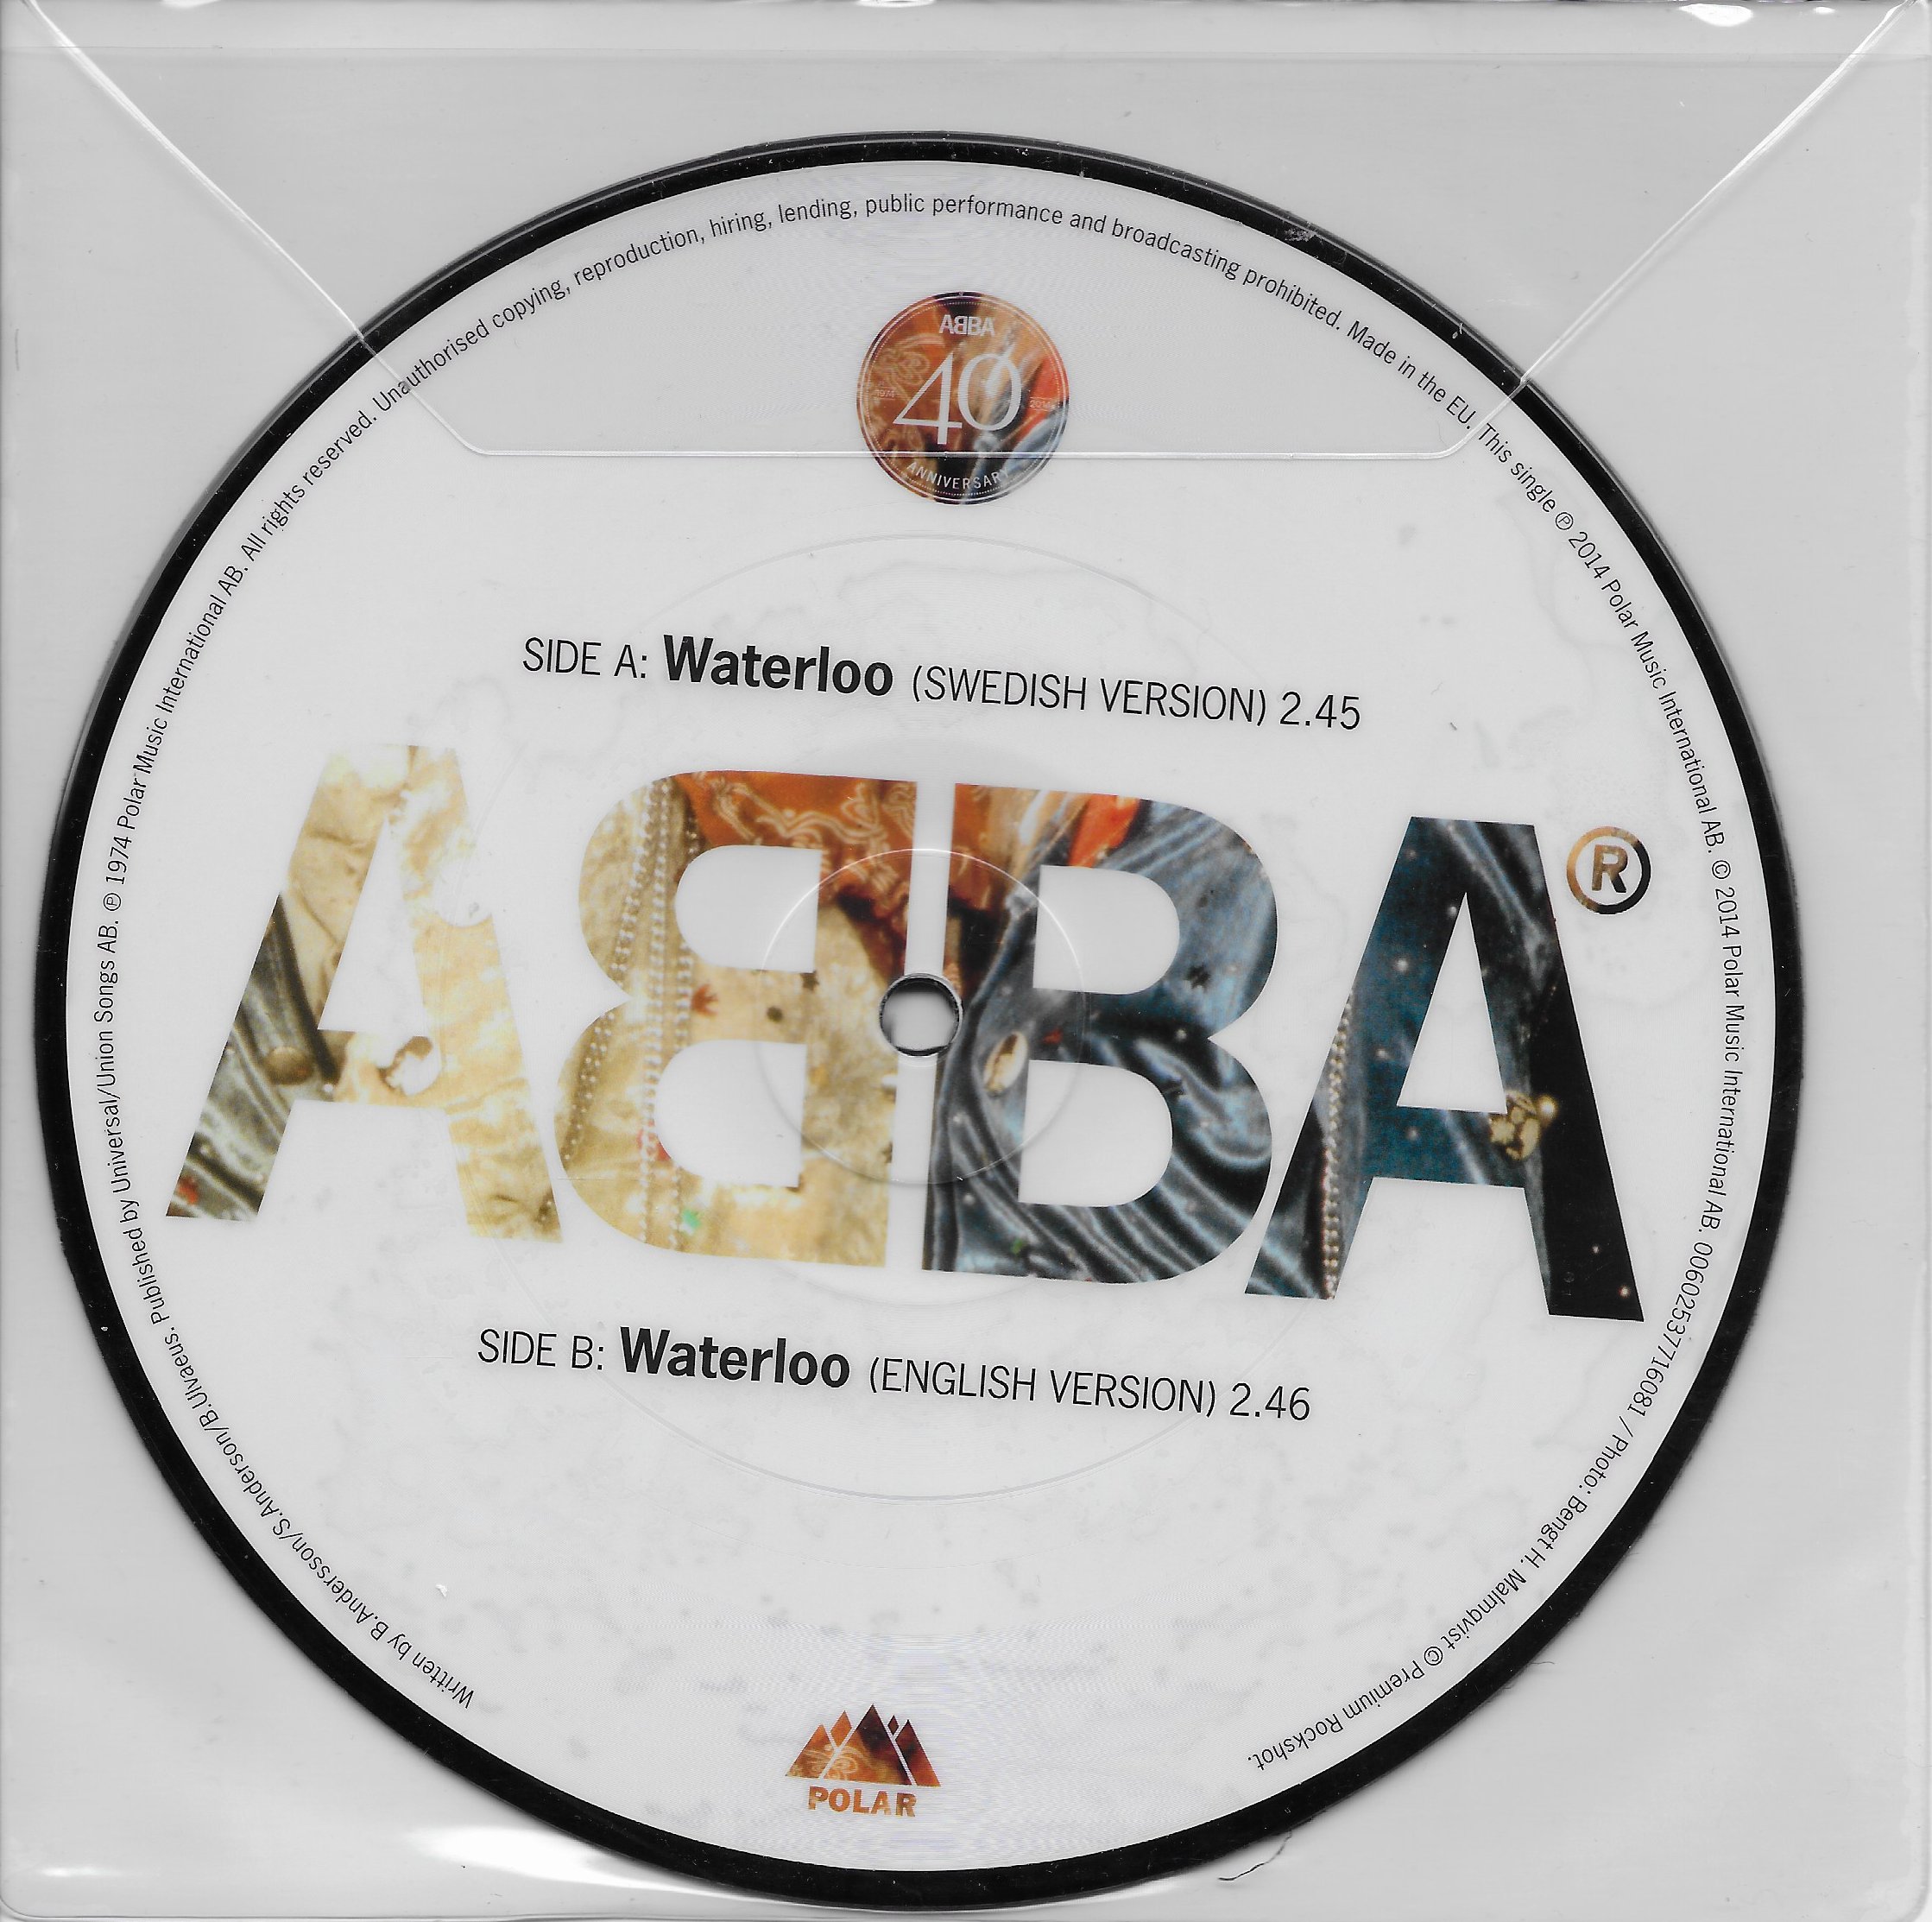 Picture of 00602537716081 Waterloo - 40th anniversary by artist B. Andersson / B. Ulvaeus / ABBA 